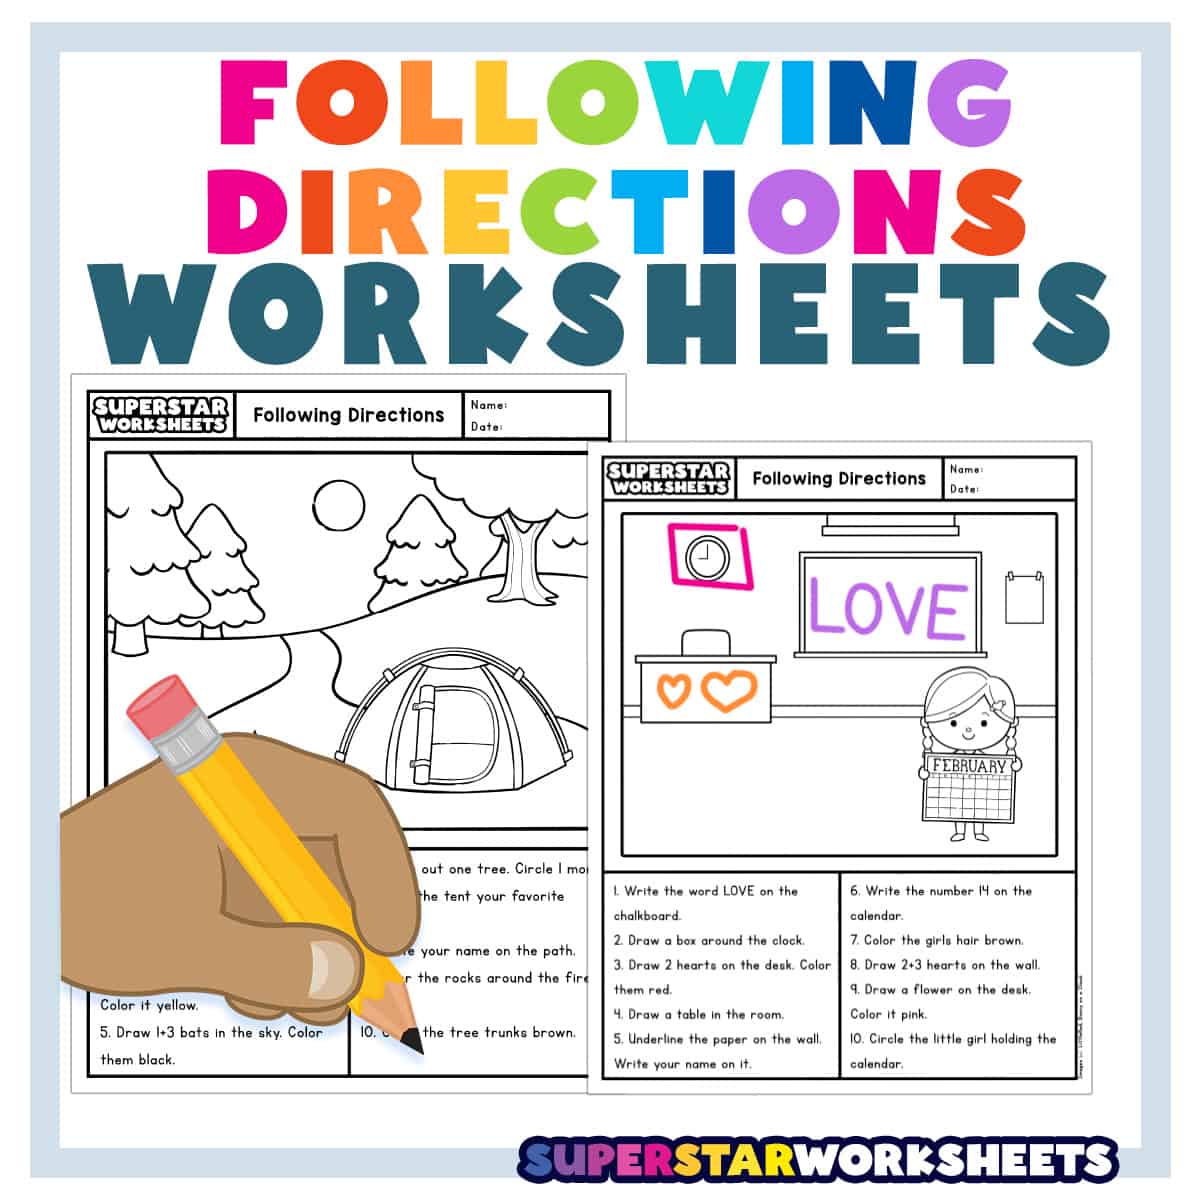 FollowingDirectionsWorksheets 3 